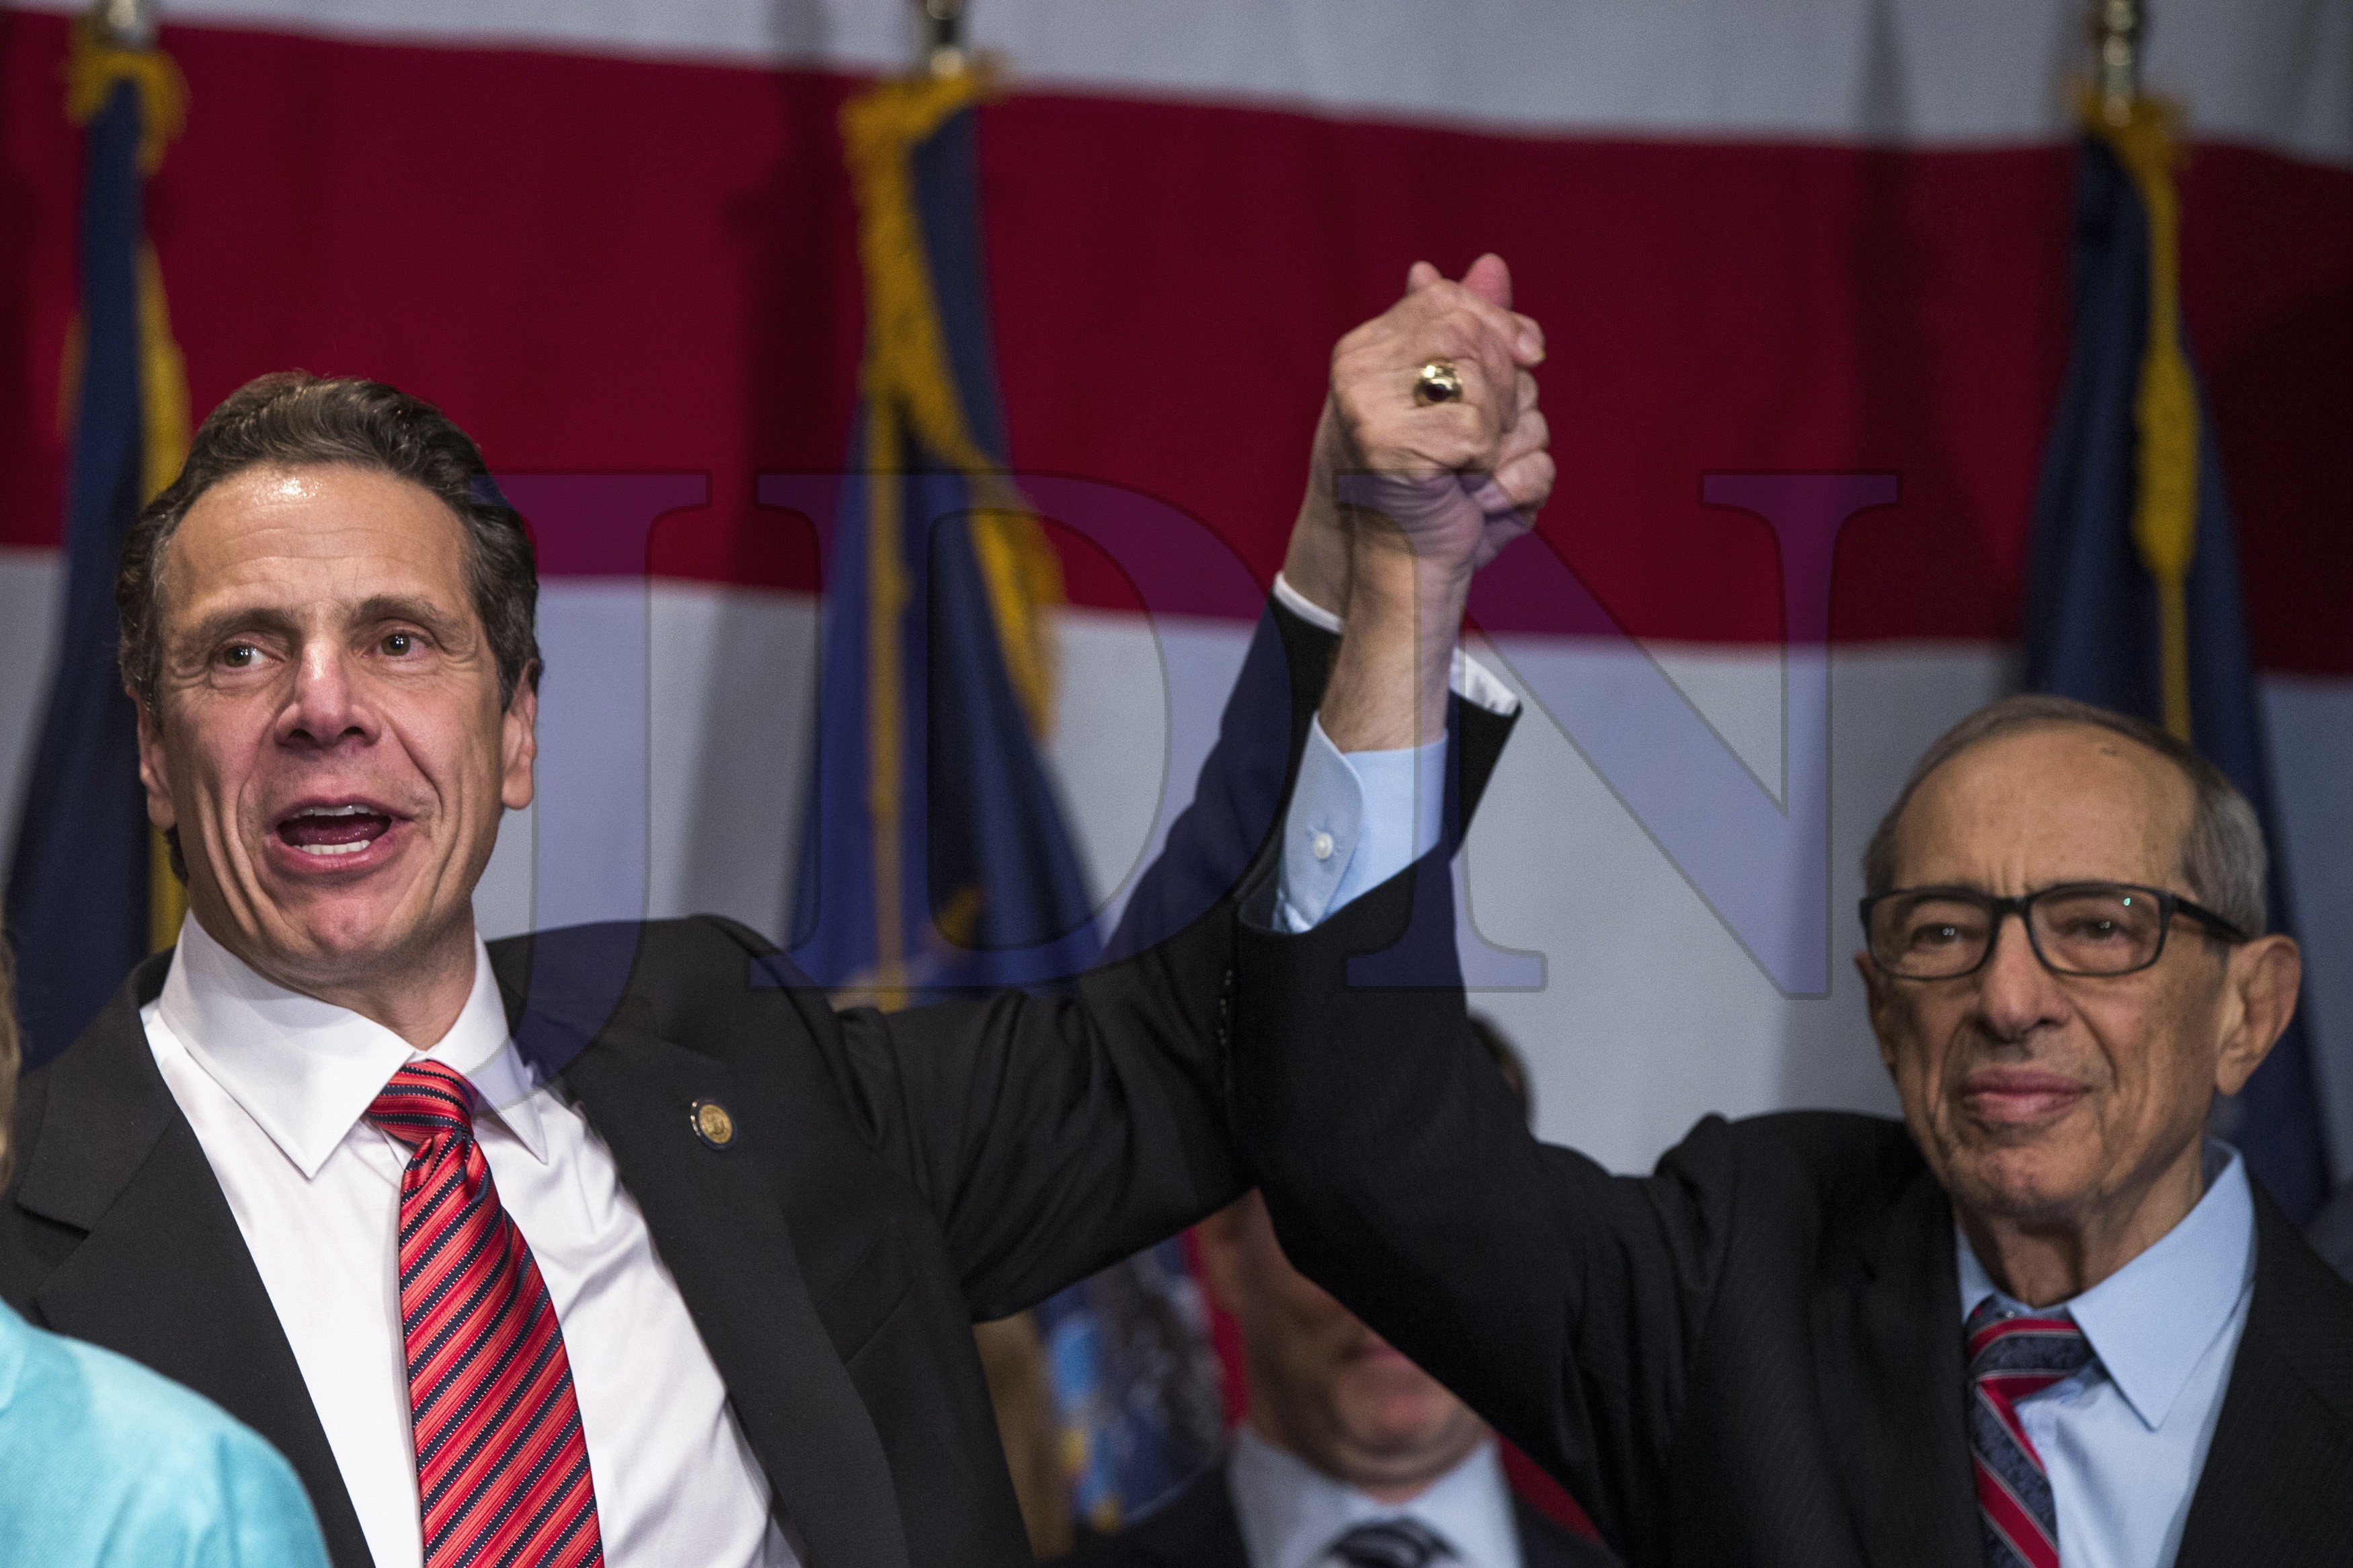 Democratic New York Governor Cuomo reacts with his father Mario after winning the New York gubernatorial race during the U.S. midterm elections at an event in New York